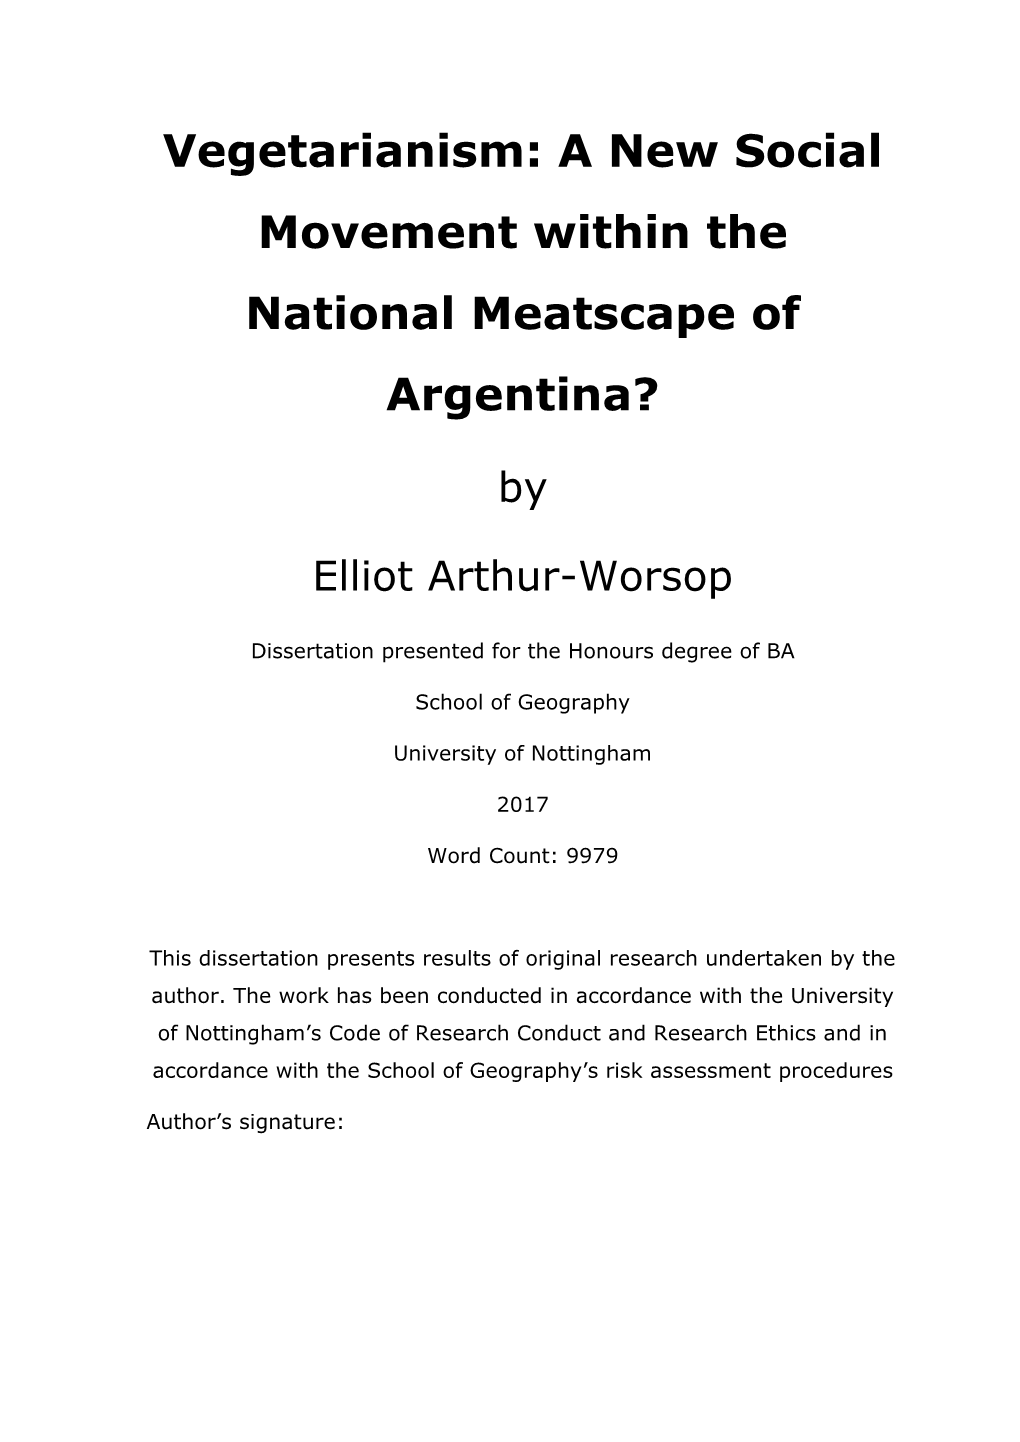 Vegetarianism: a New Social Movement Within the National Meatscape of Argentina?